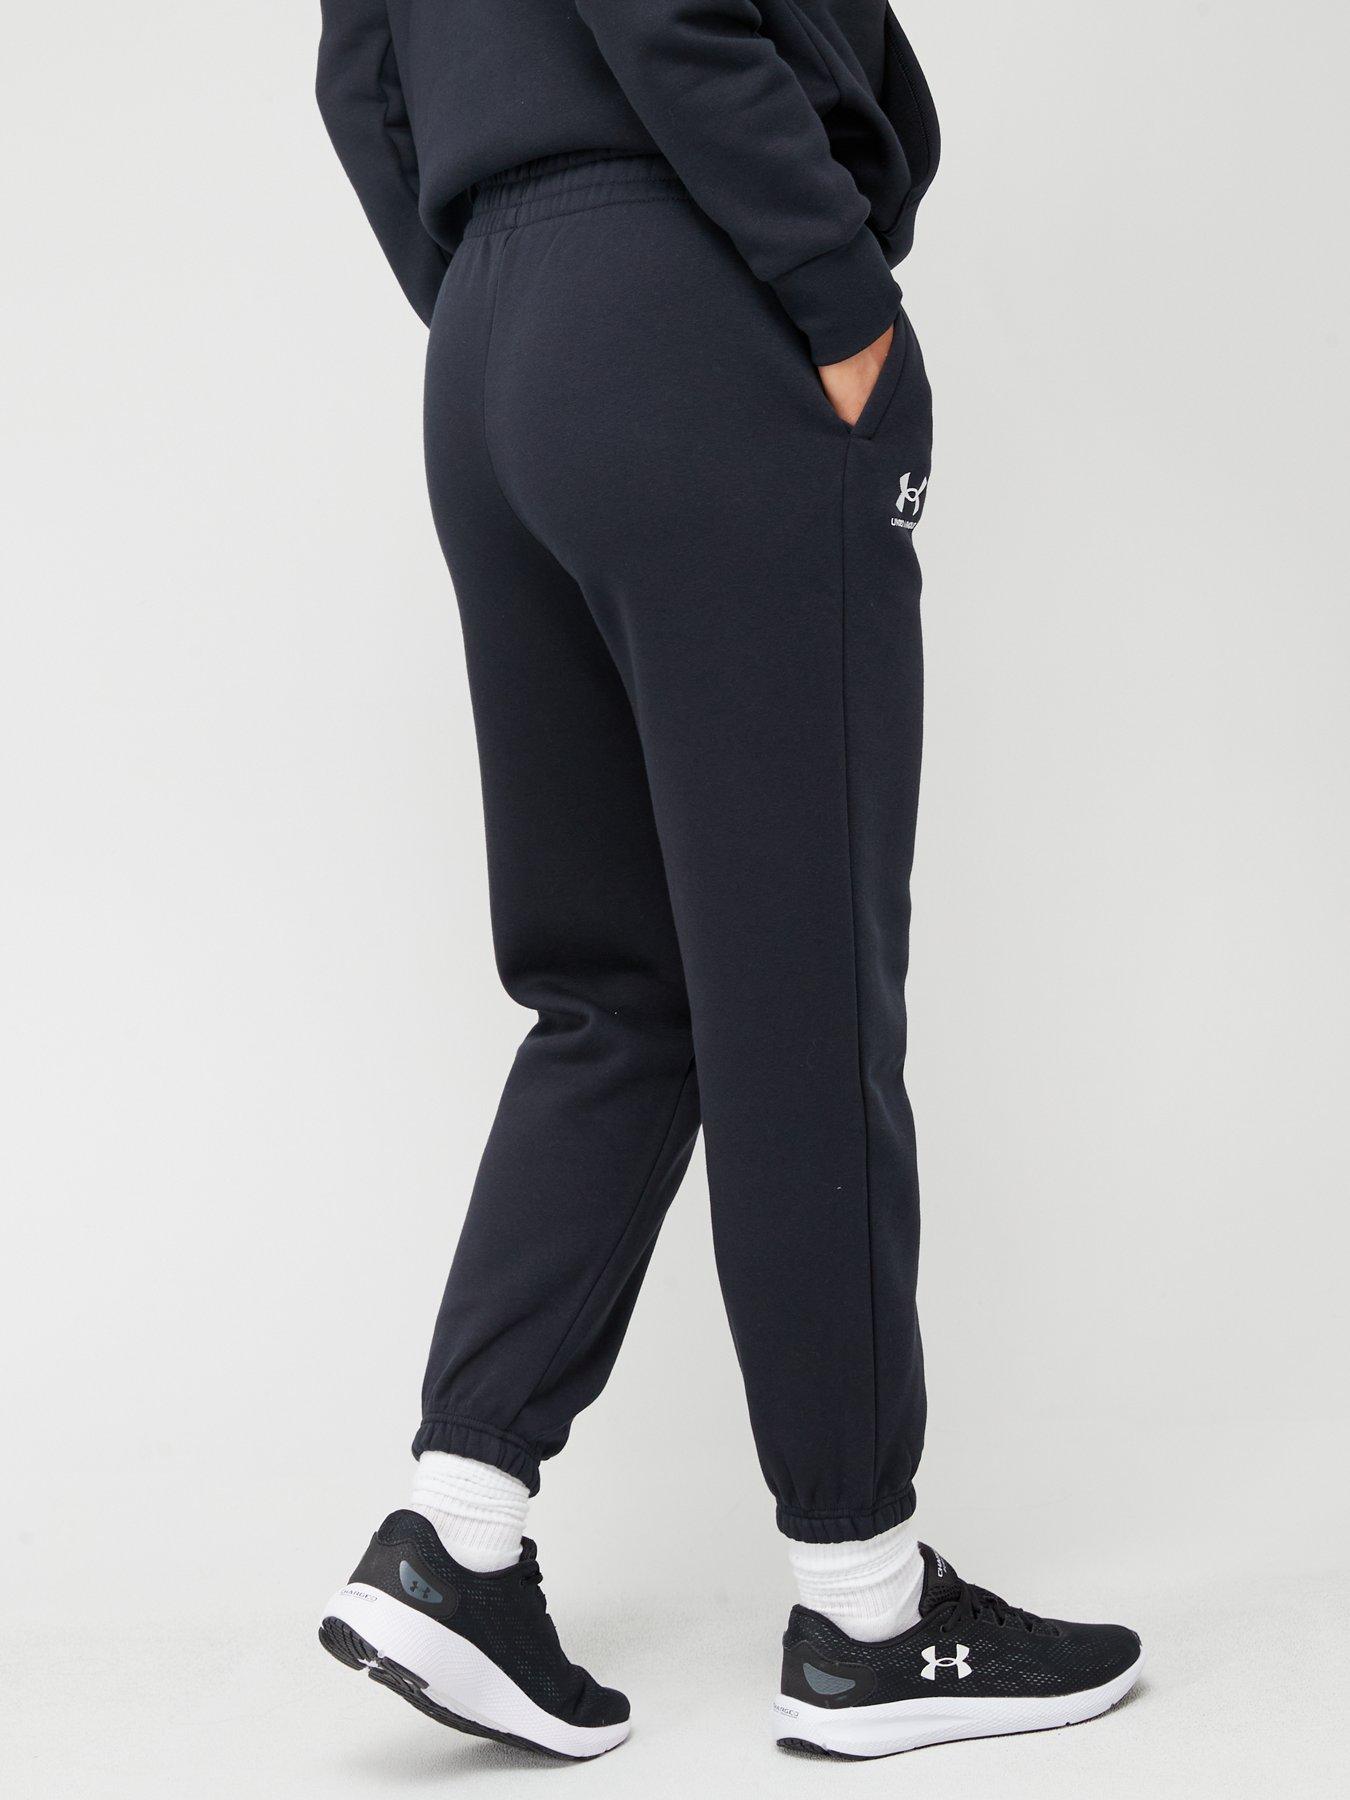  Under Armour Essential Fleece Womens Joggers XS Black-White :  Clothing, Shoes & Jewelry